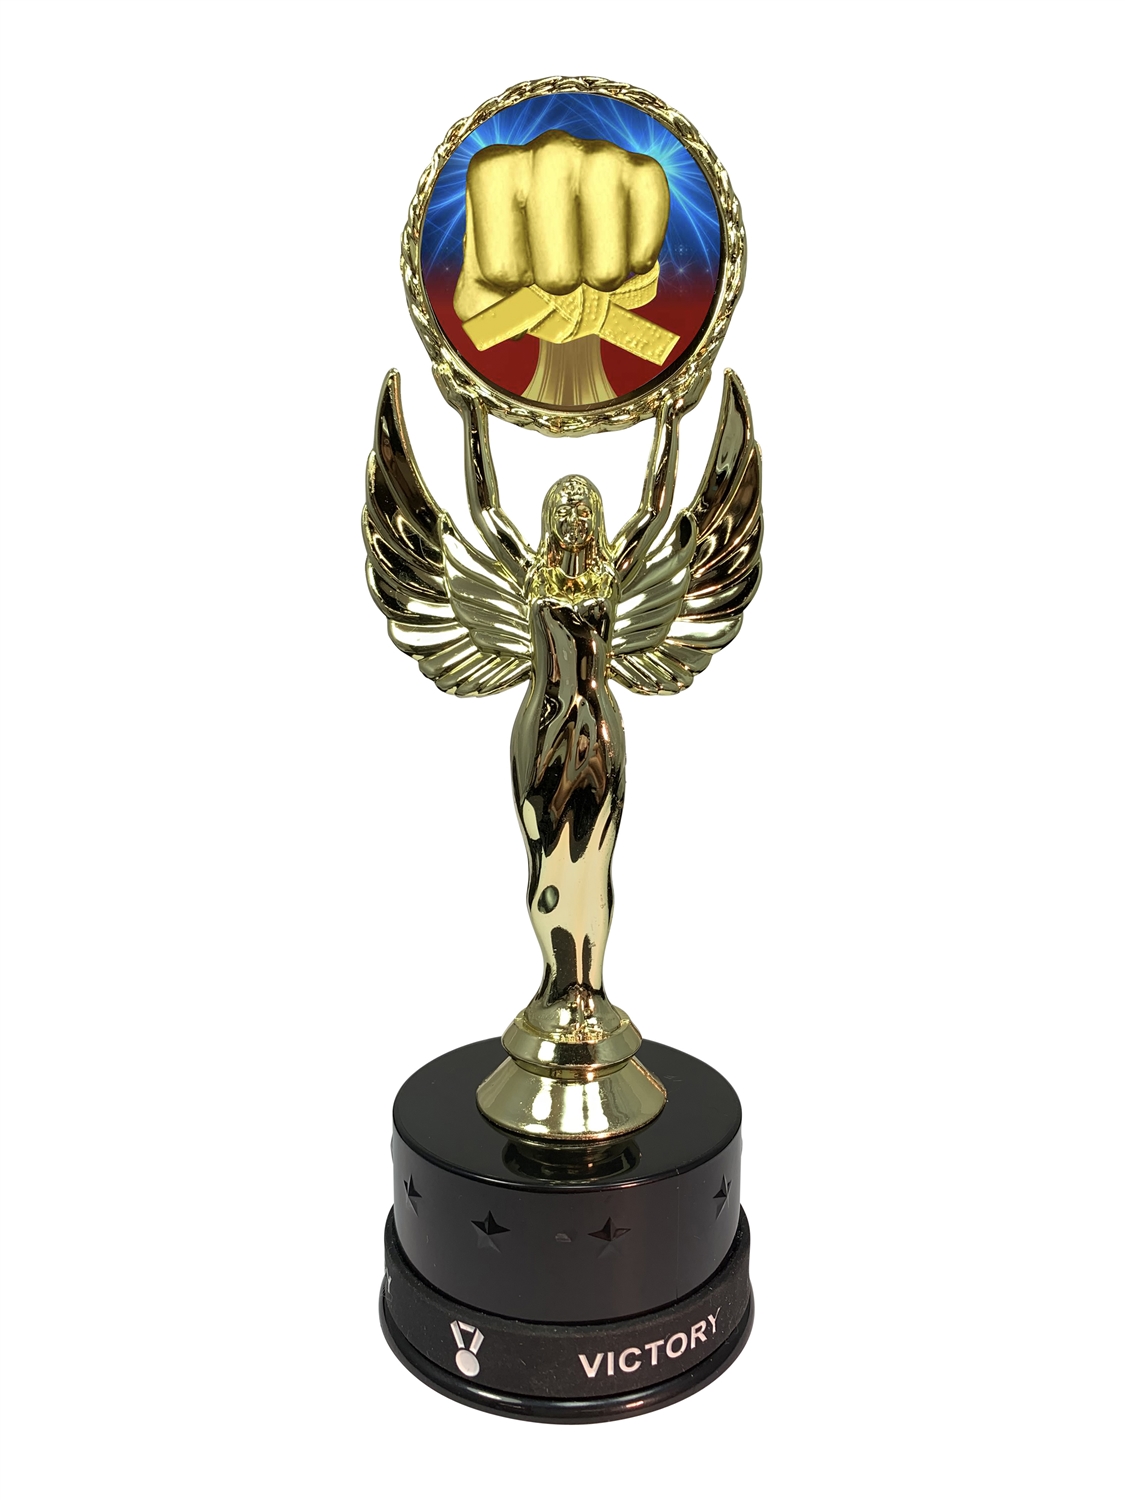 KUNG FU MARTIAL ART TROPHY TROPHIES ACRYLIC *FREE ENGRAVING* 100mm *4 SIZES*